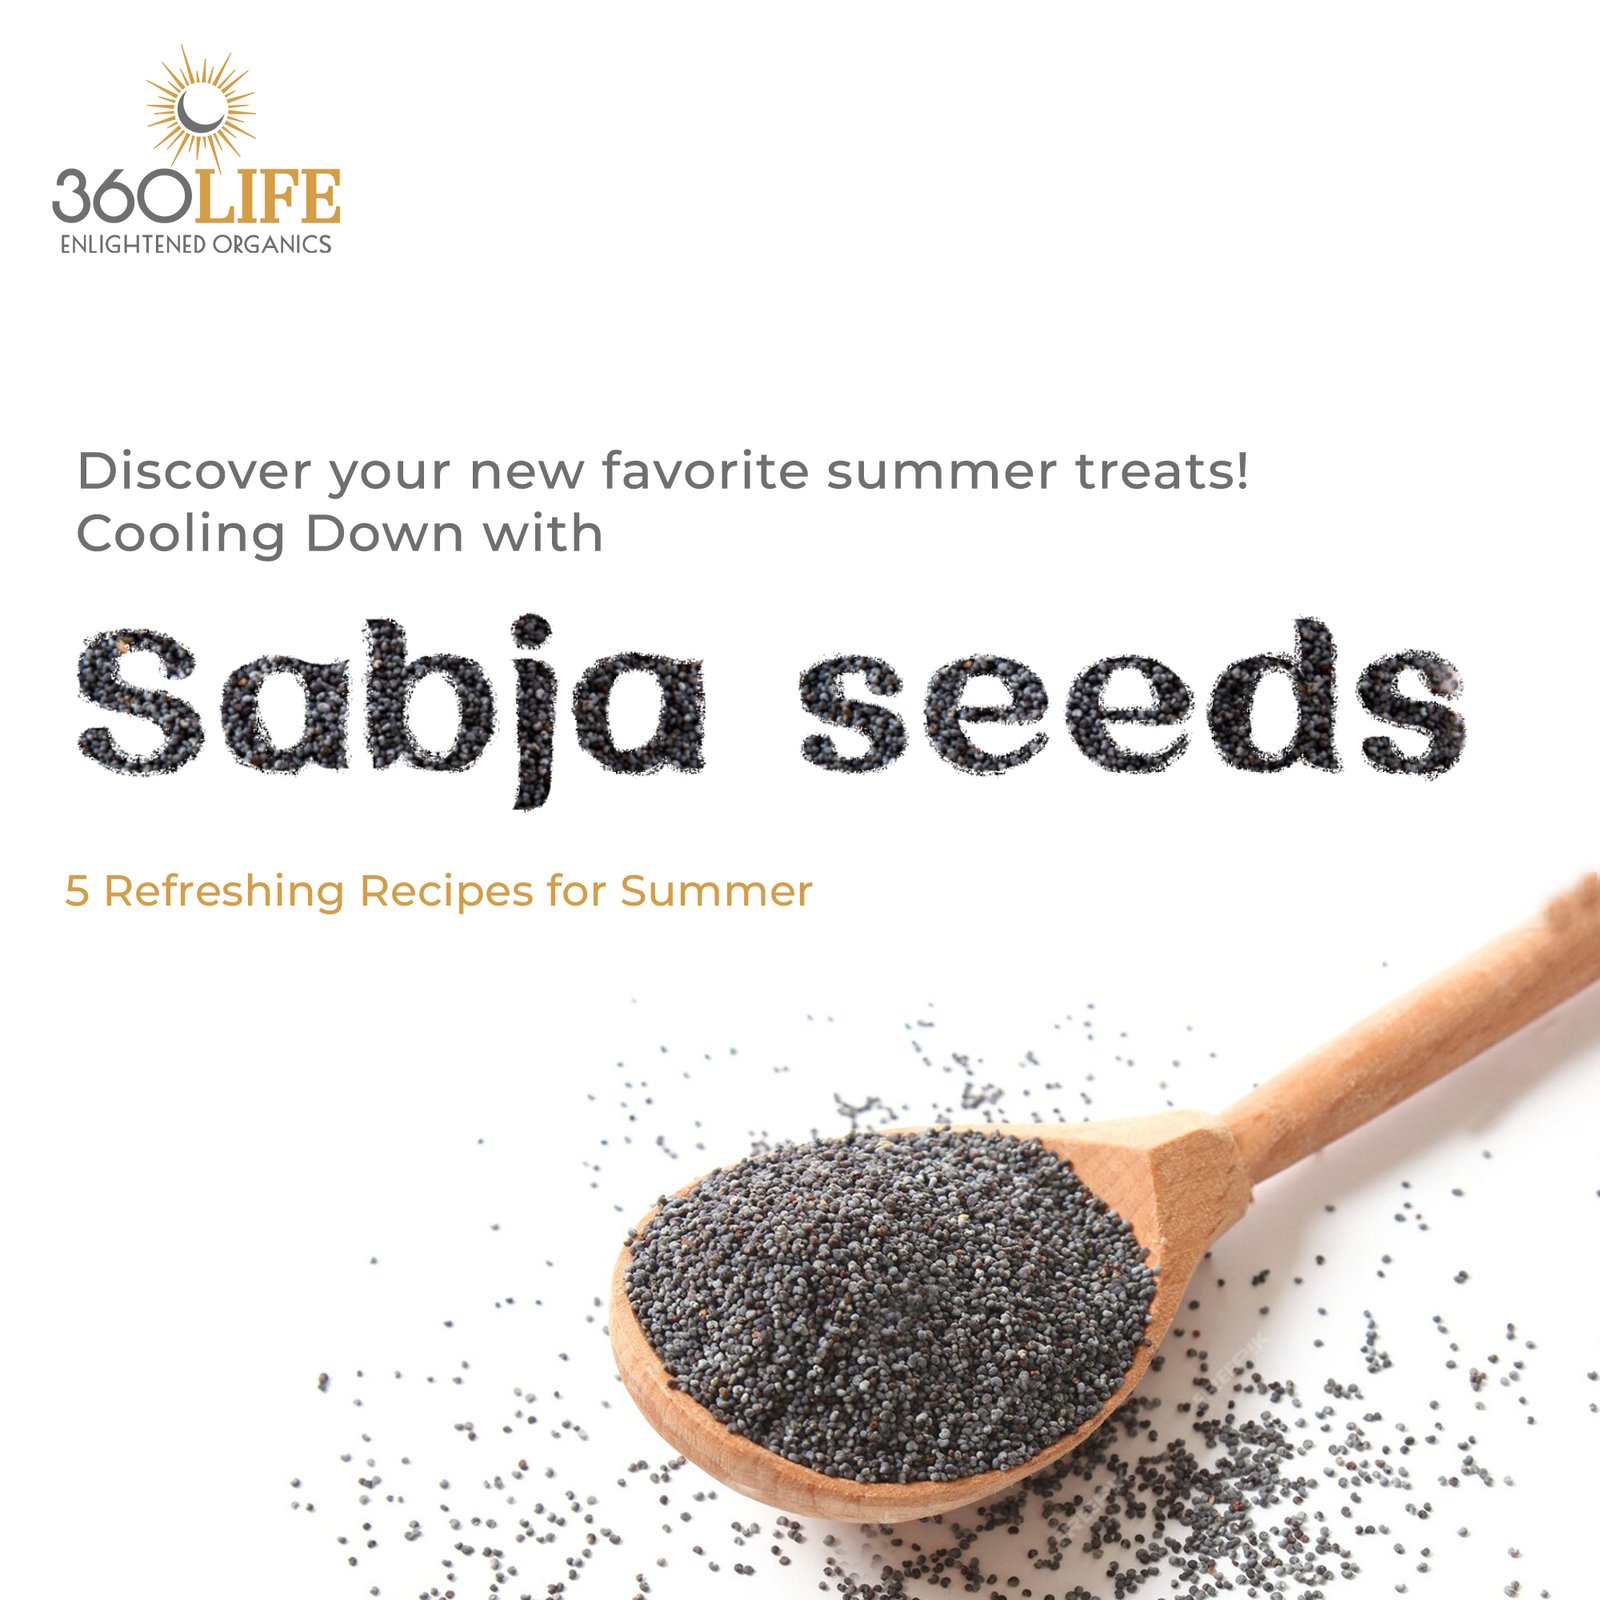 Cooling Down with Sabja Seeds: 5 Refreshing Recipes for Summer